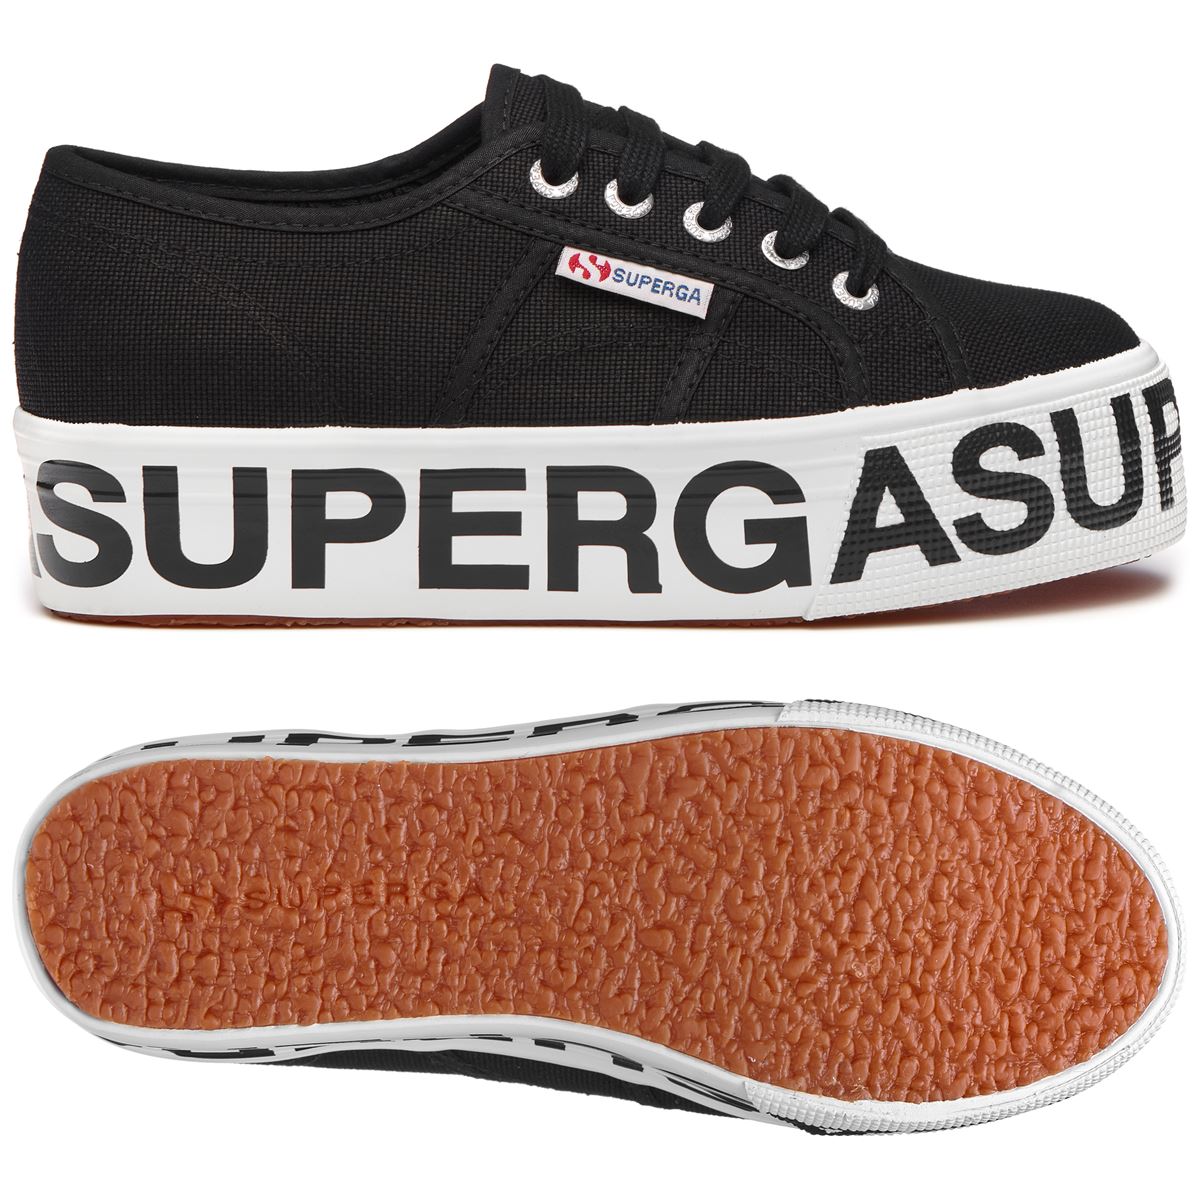  - Superga sneakers cotw outsole lettering